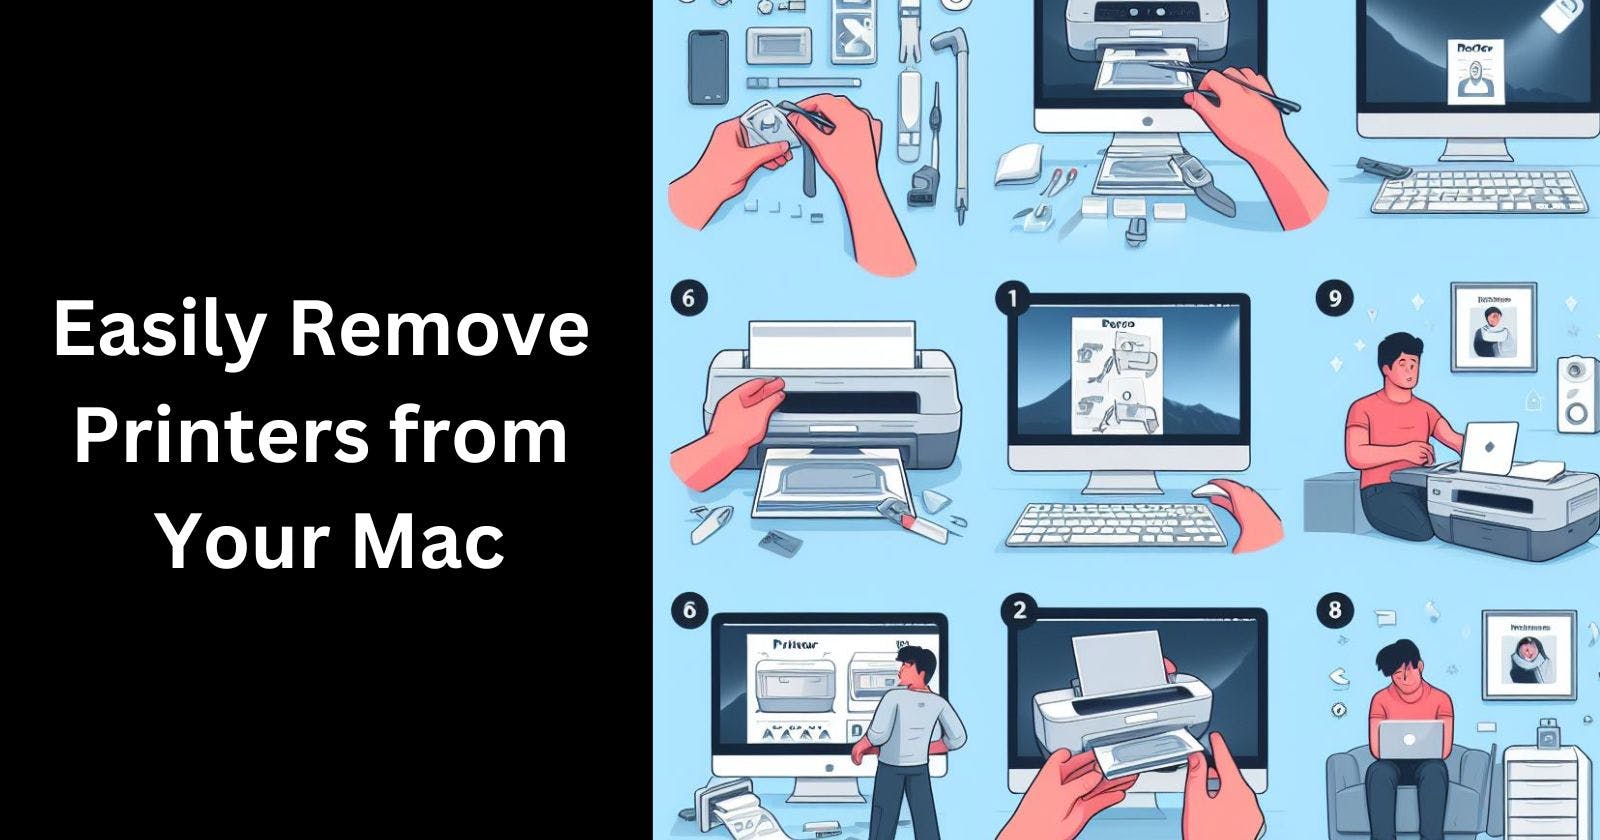 How to Easily Remove Printers from Your Mac